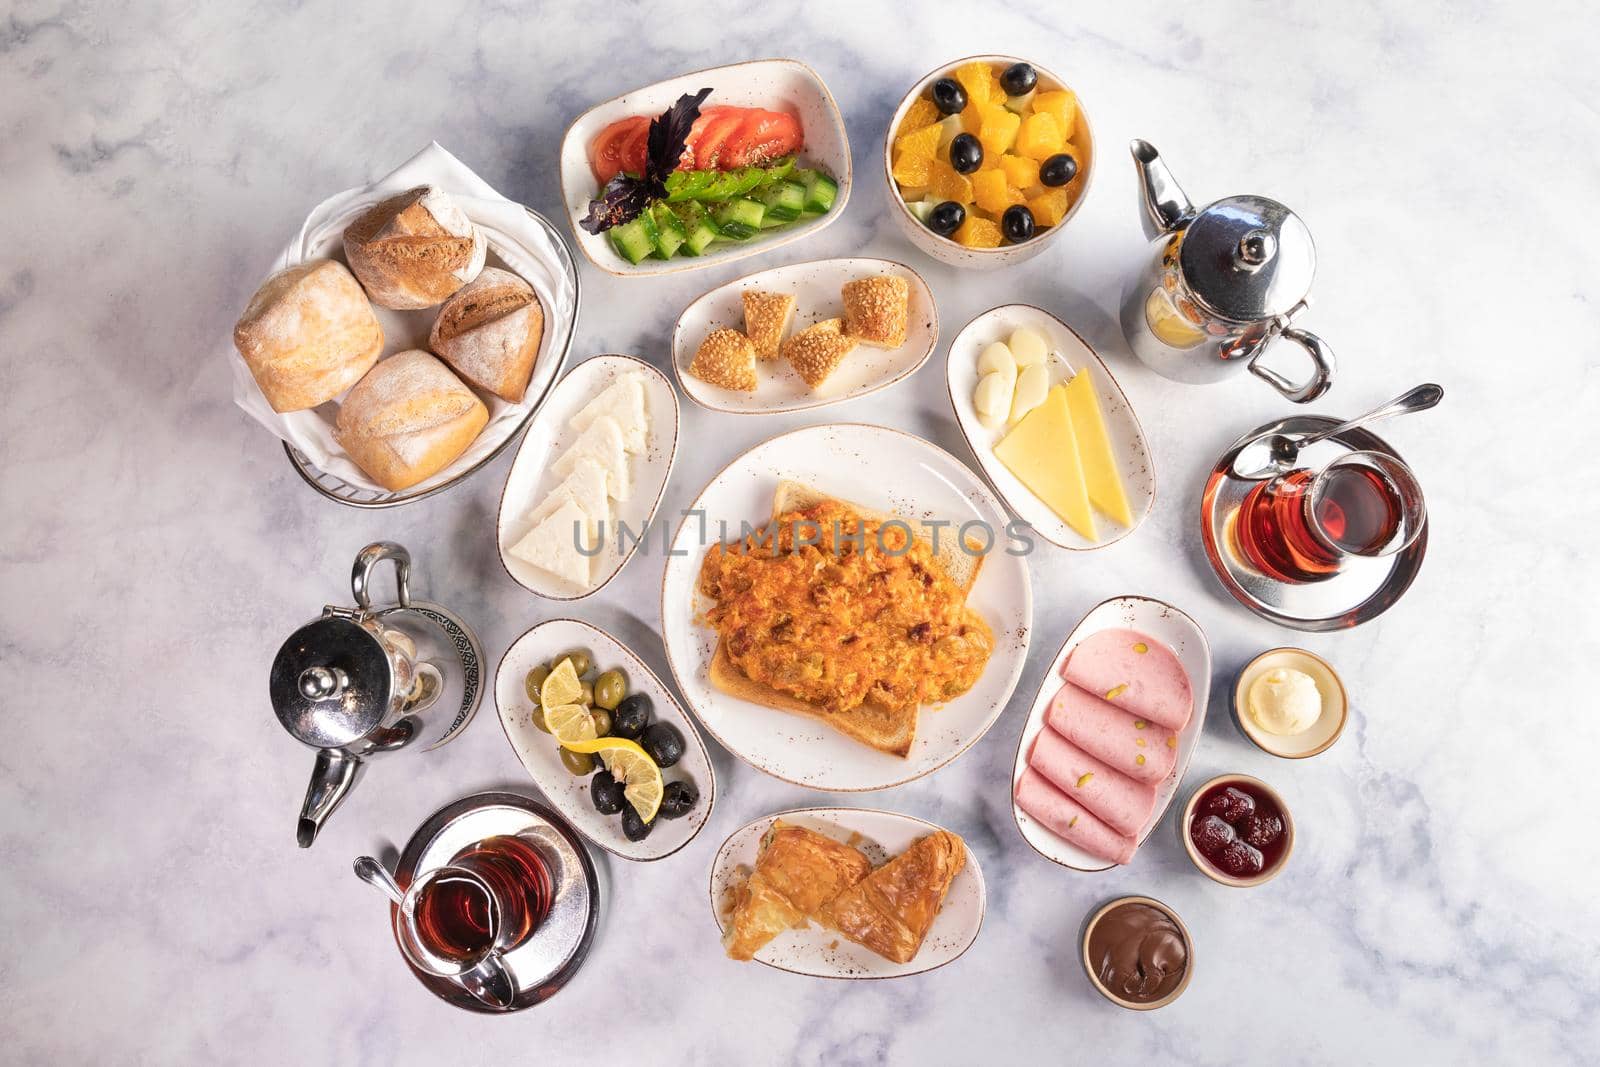 Breakfast menu foods on the white background by ferhad